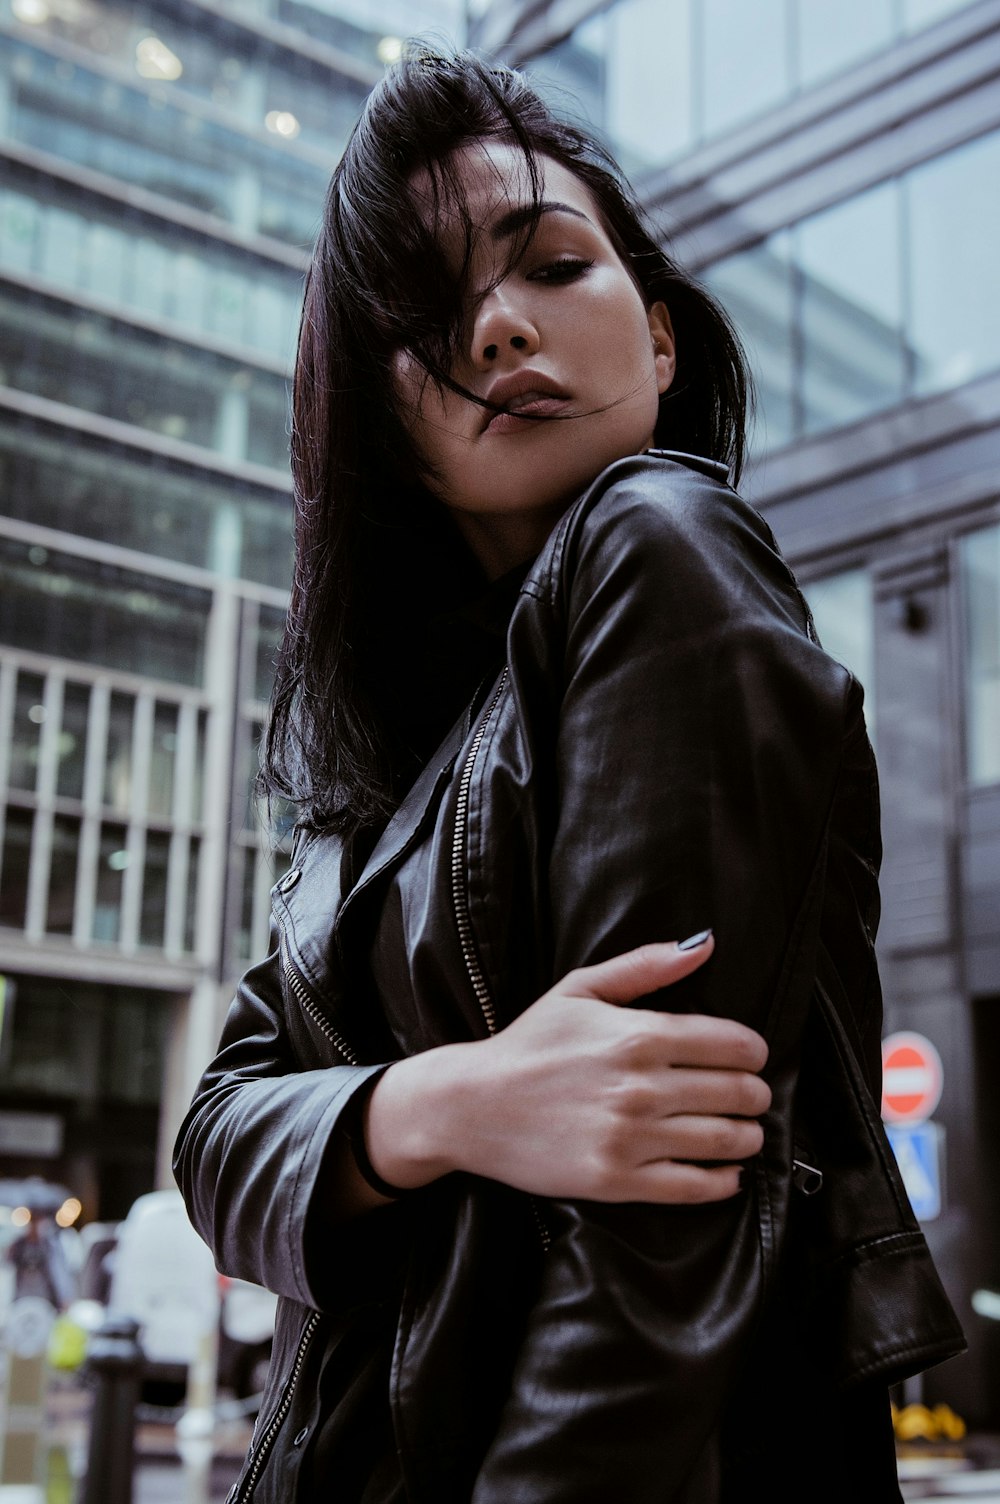 a woman wearing a black leather jacket and smoking a cigarette